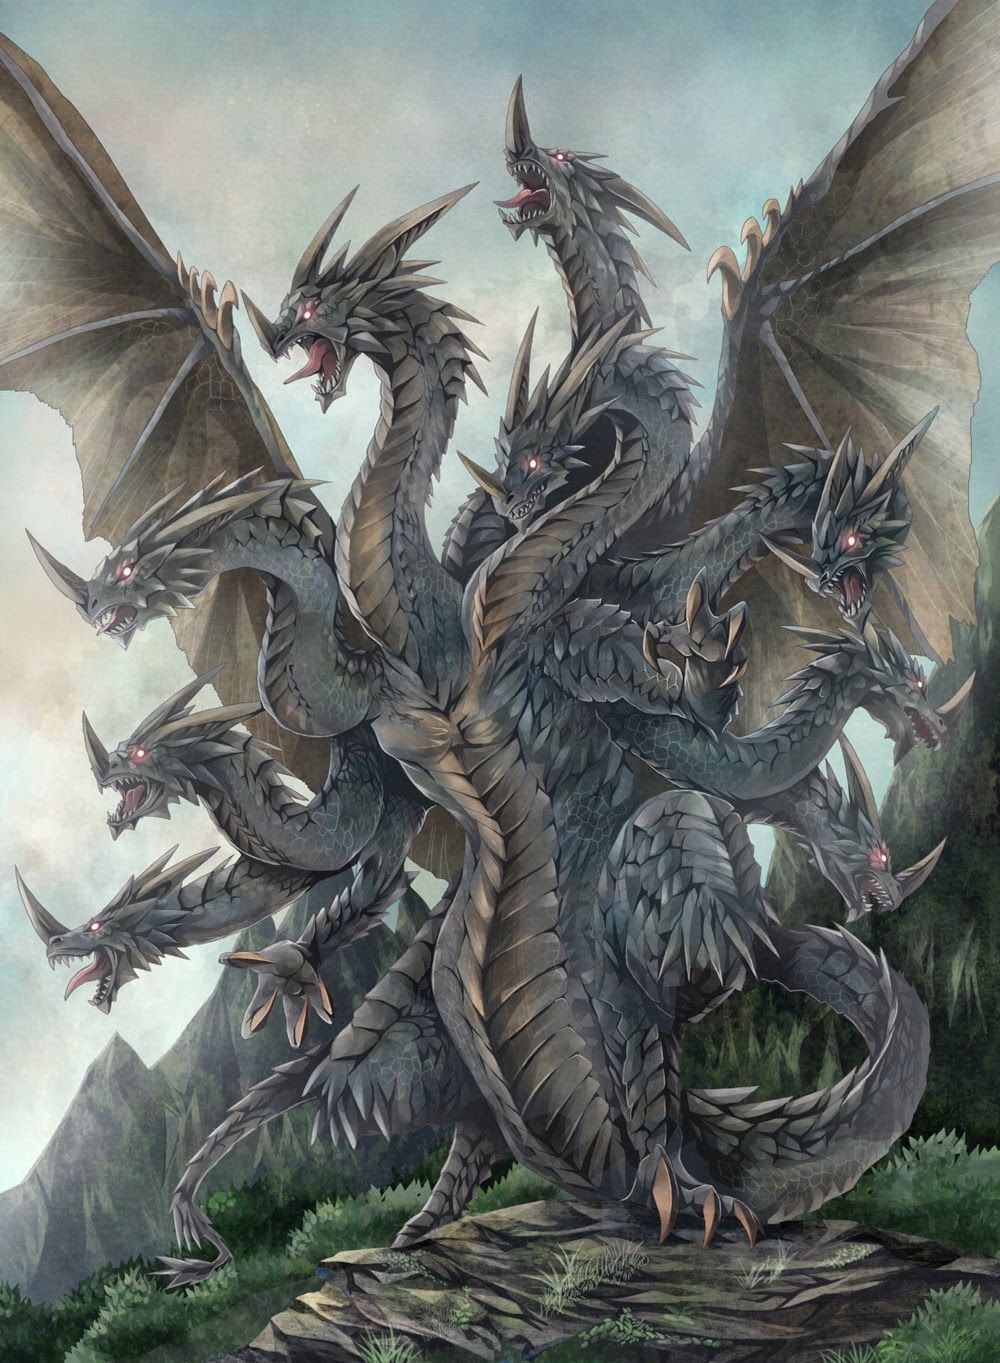 Best Hydra image. mythical creatures, creatures, mythical